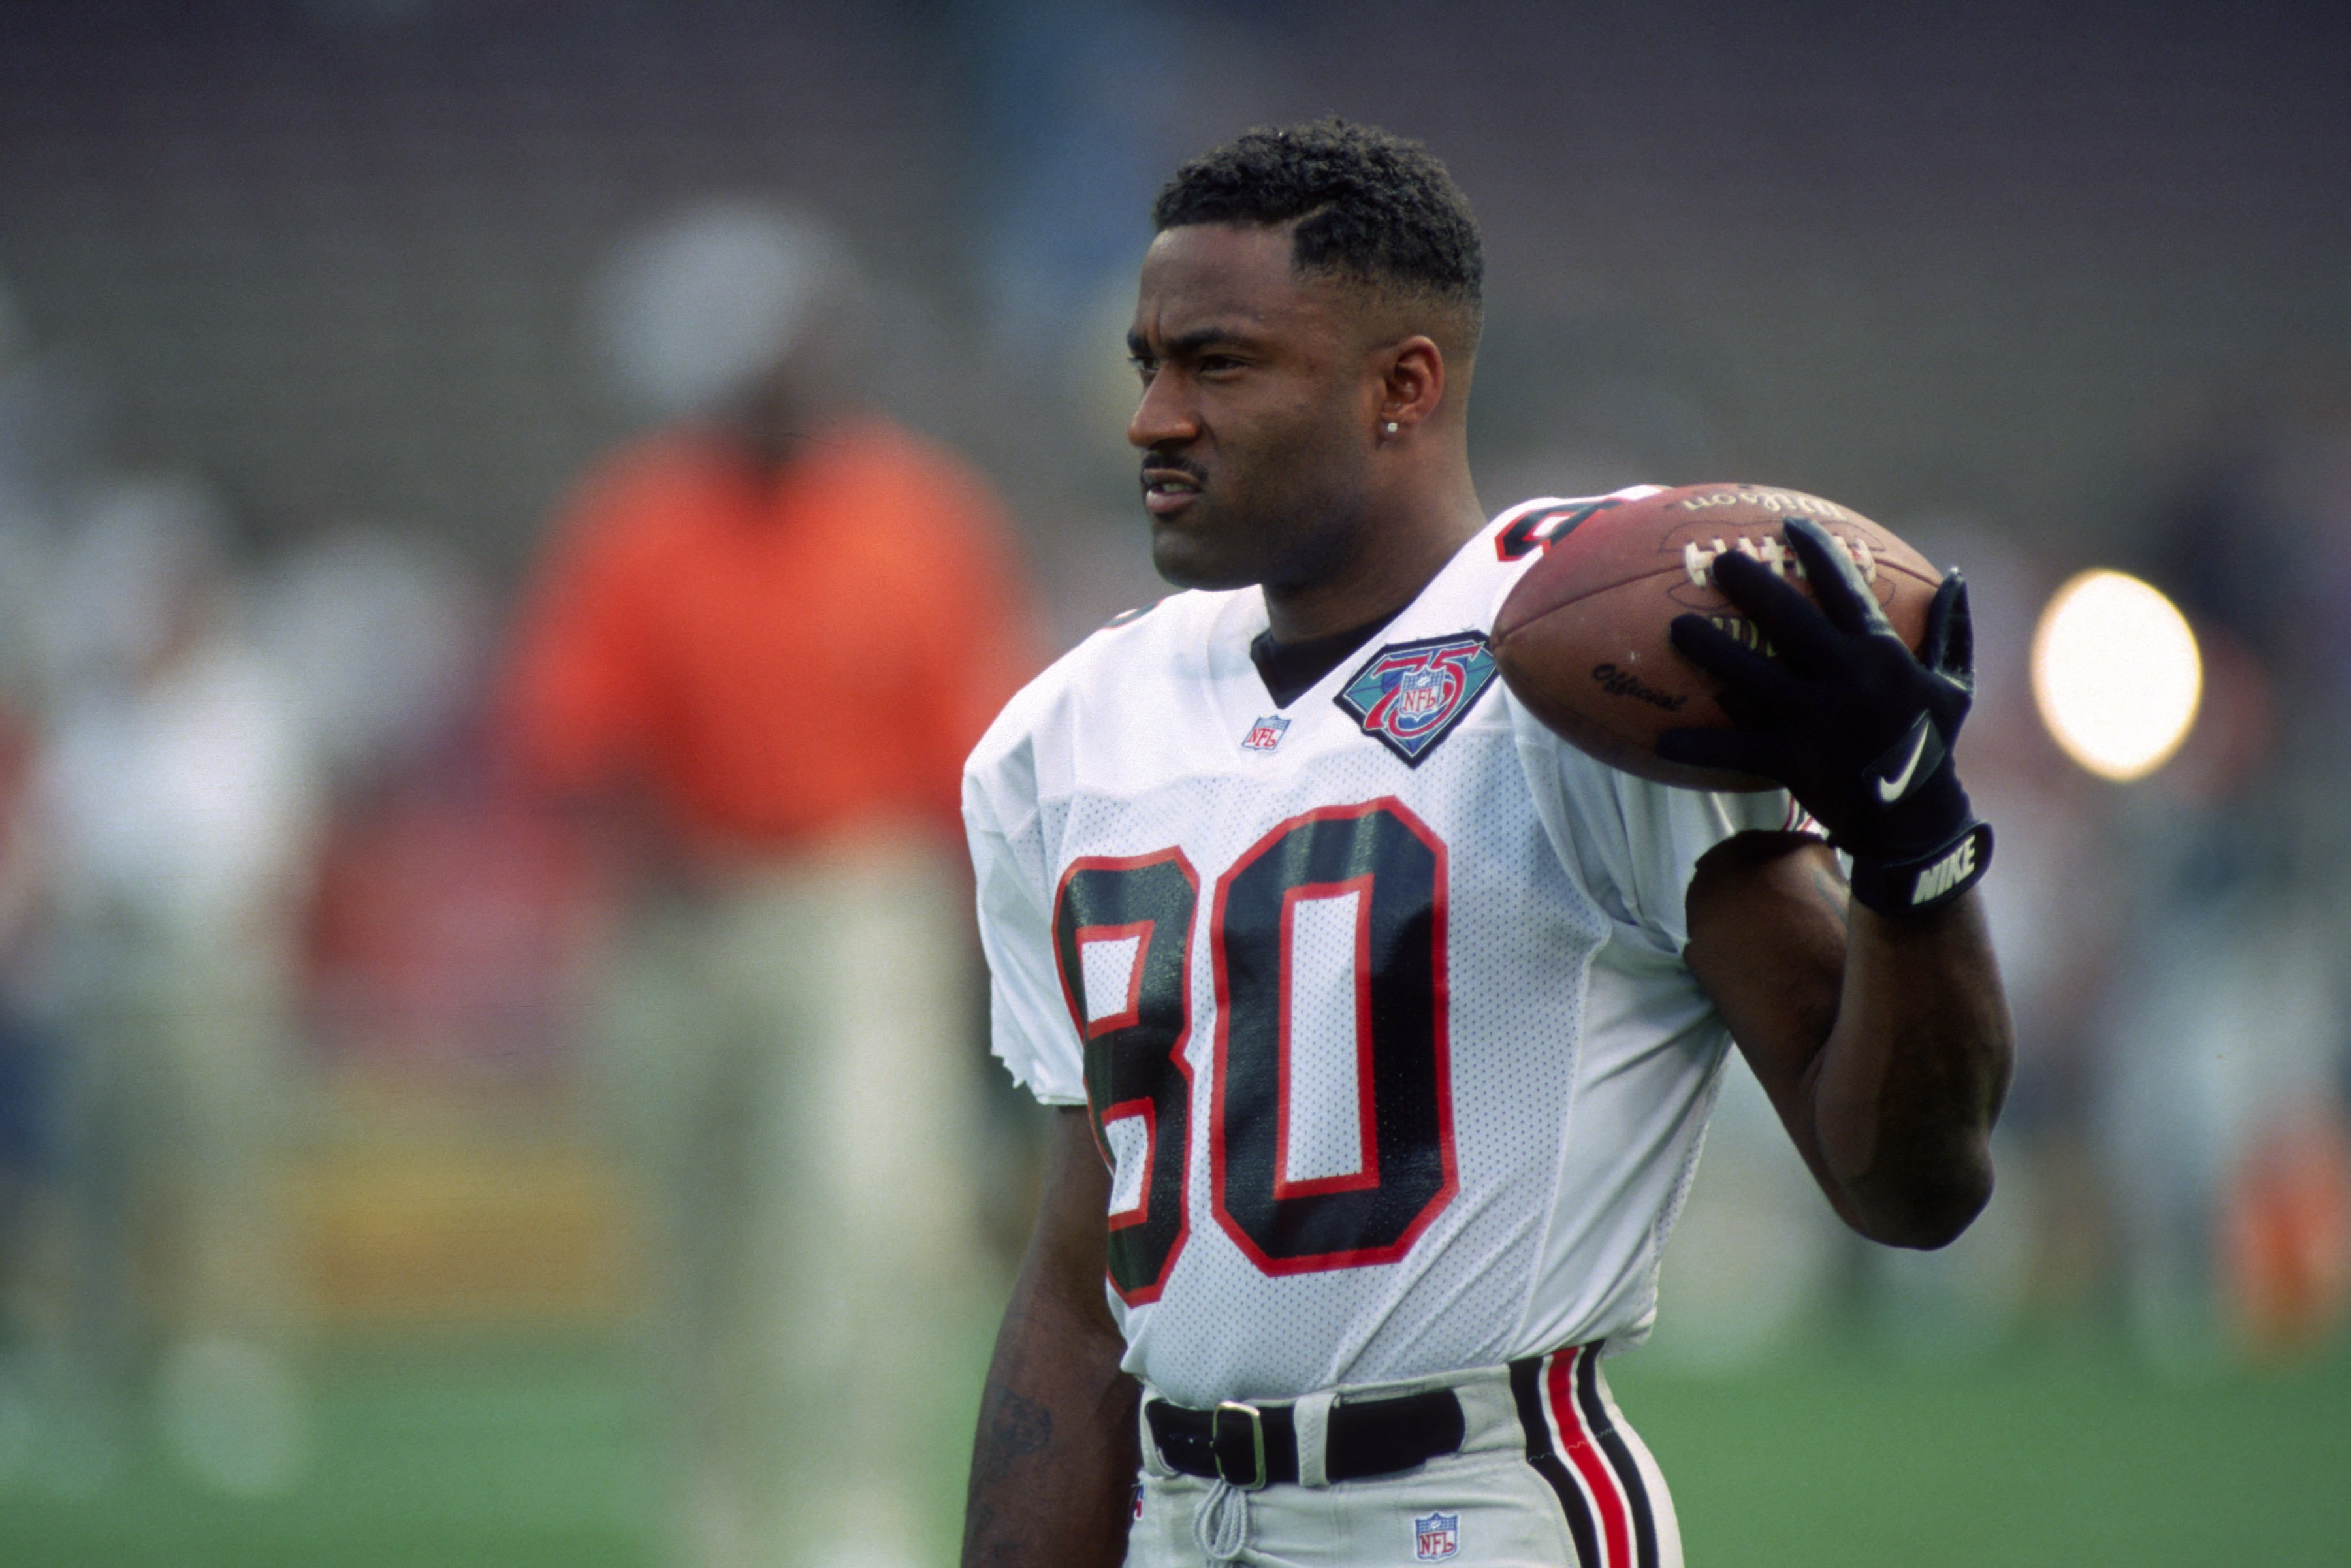  Andre Rison #80 of the Atlanta Falcons looks on from the field during pregame warmup prior to a preseason game against the Cleveland Browns at Cleveland Browns Stadium on August 19, 1994| Photo: Getty Images